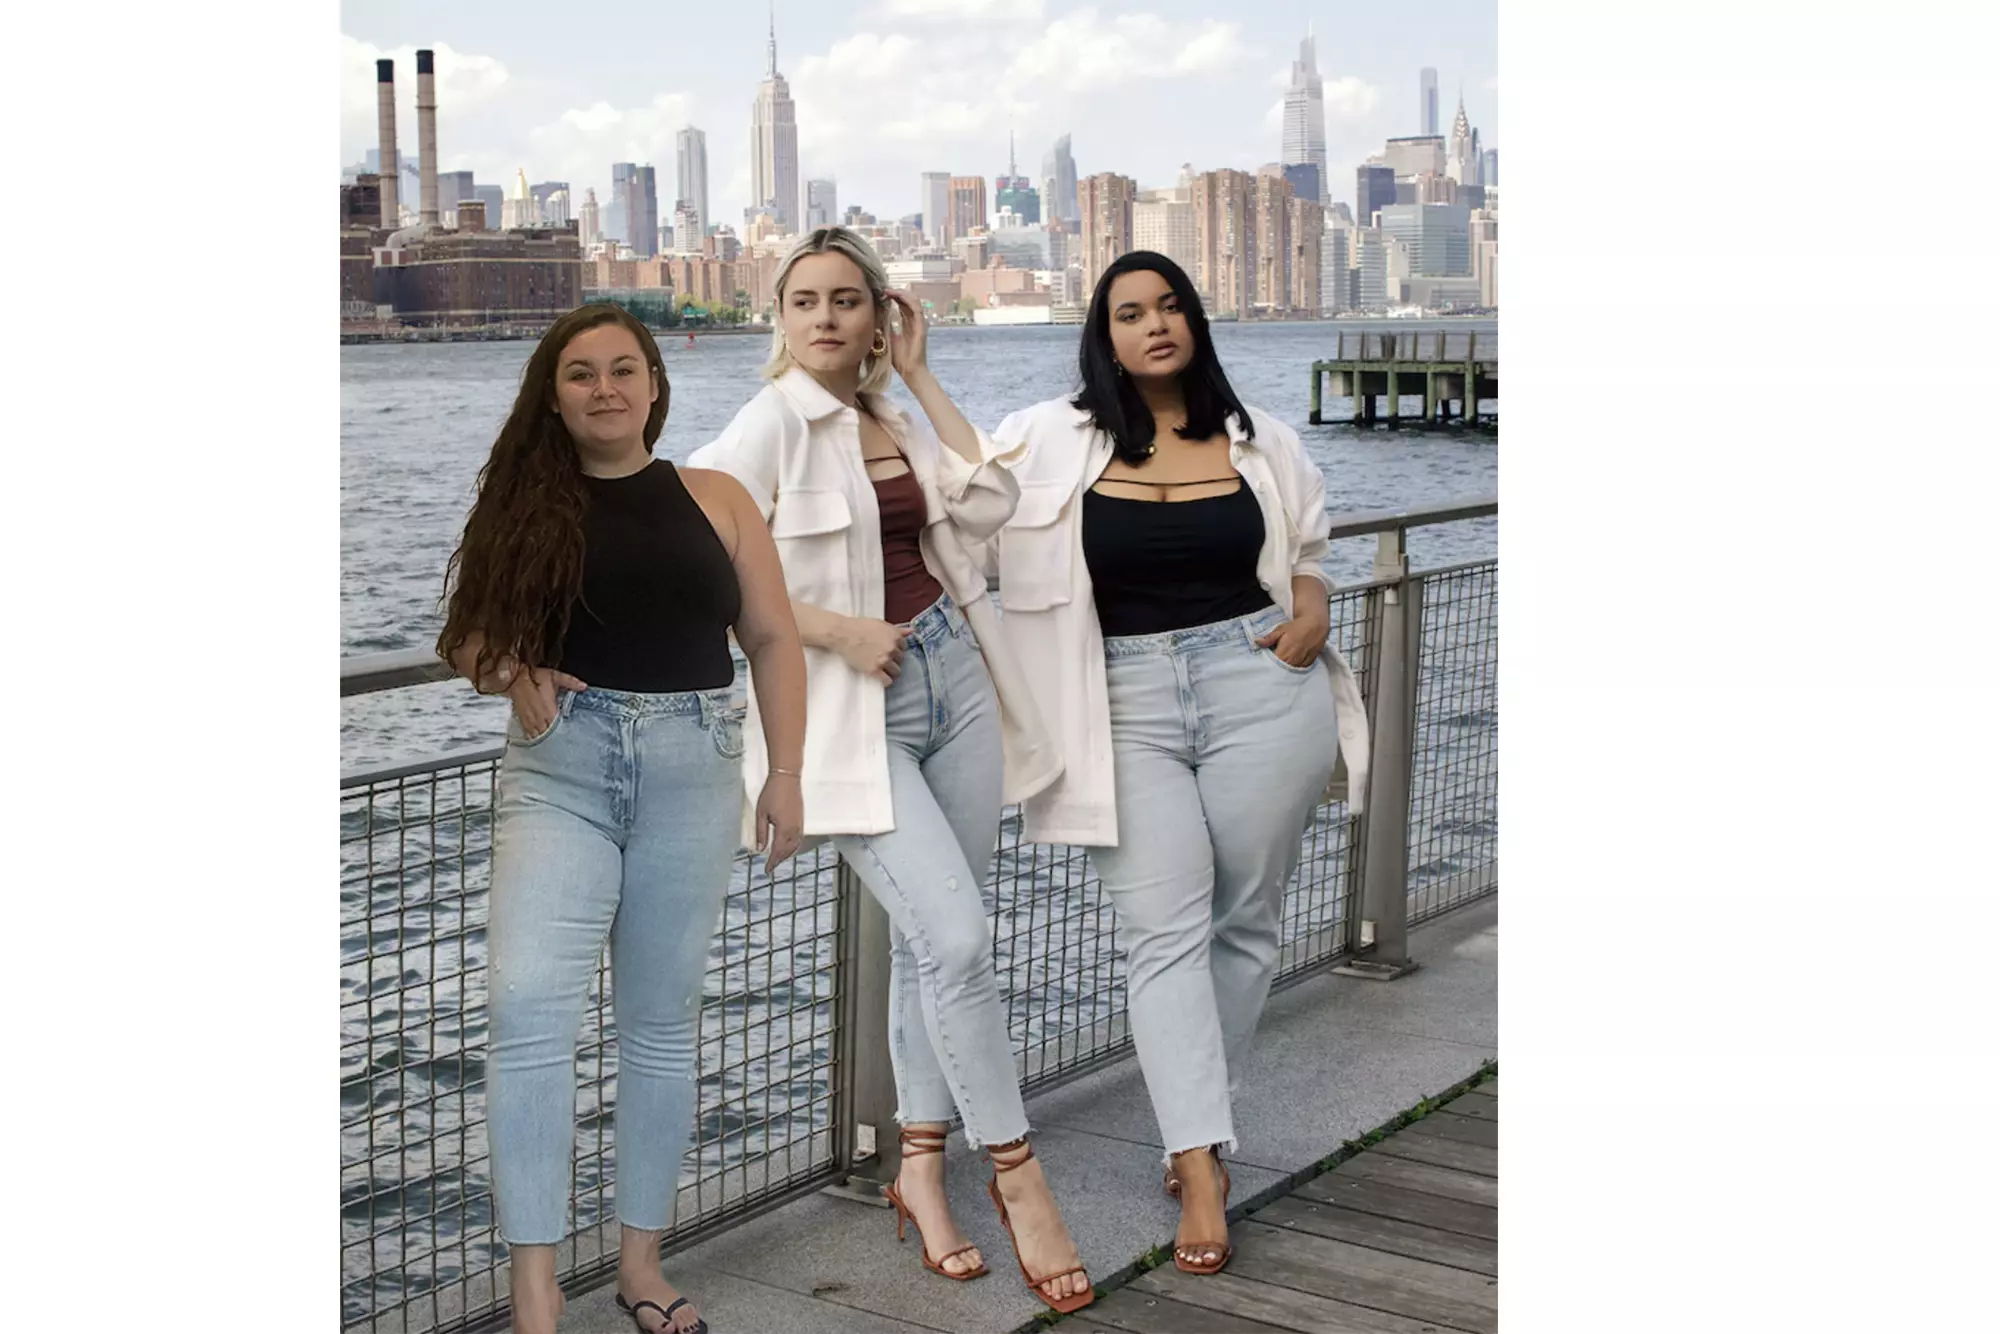 Sophie Cannon photoshopped into an Abercrombie ad with two women in skinny jeans in front of the NYC skyline